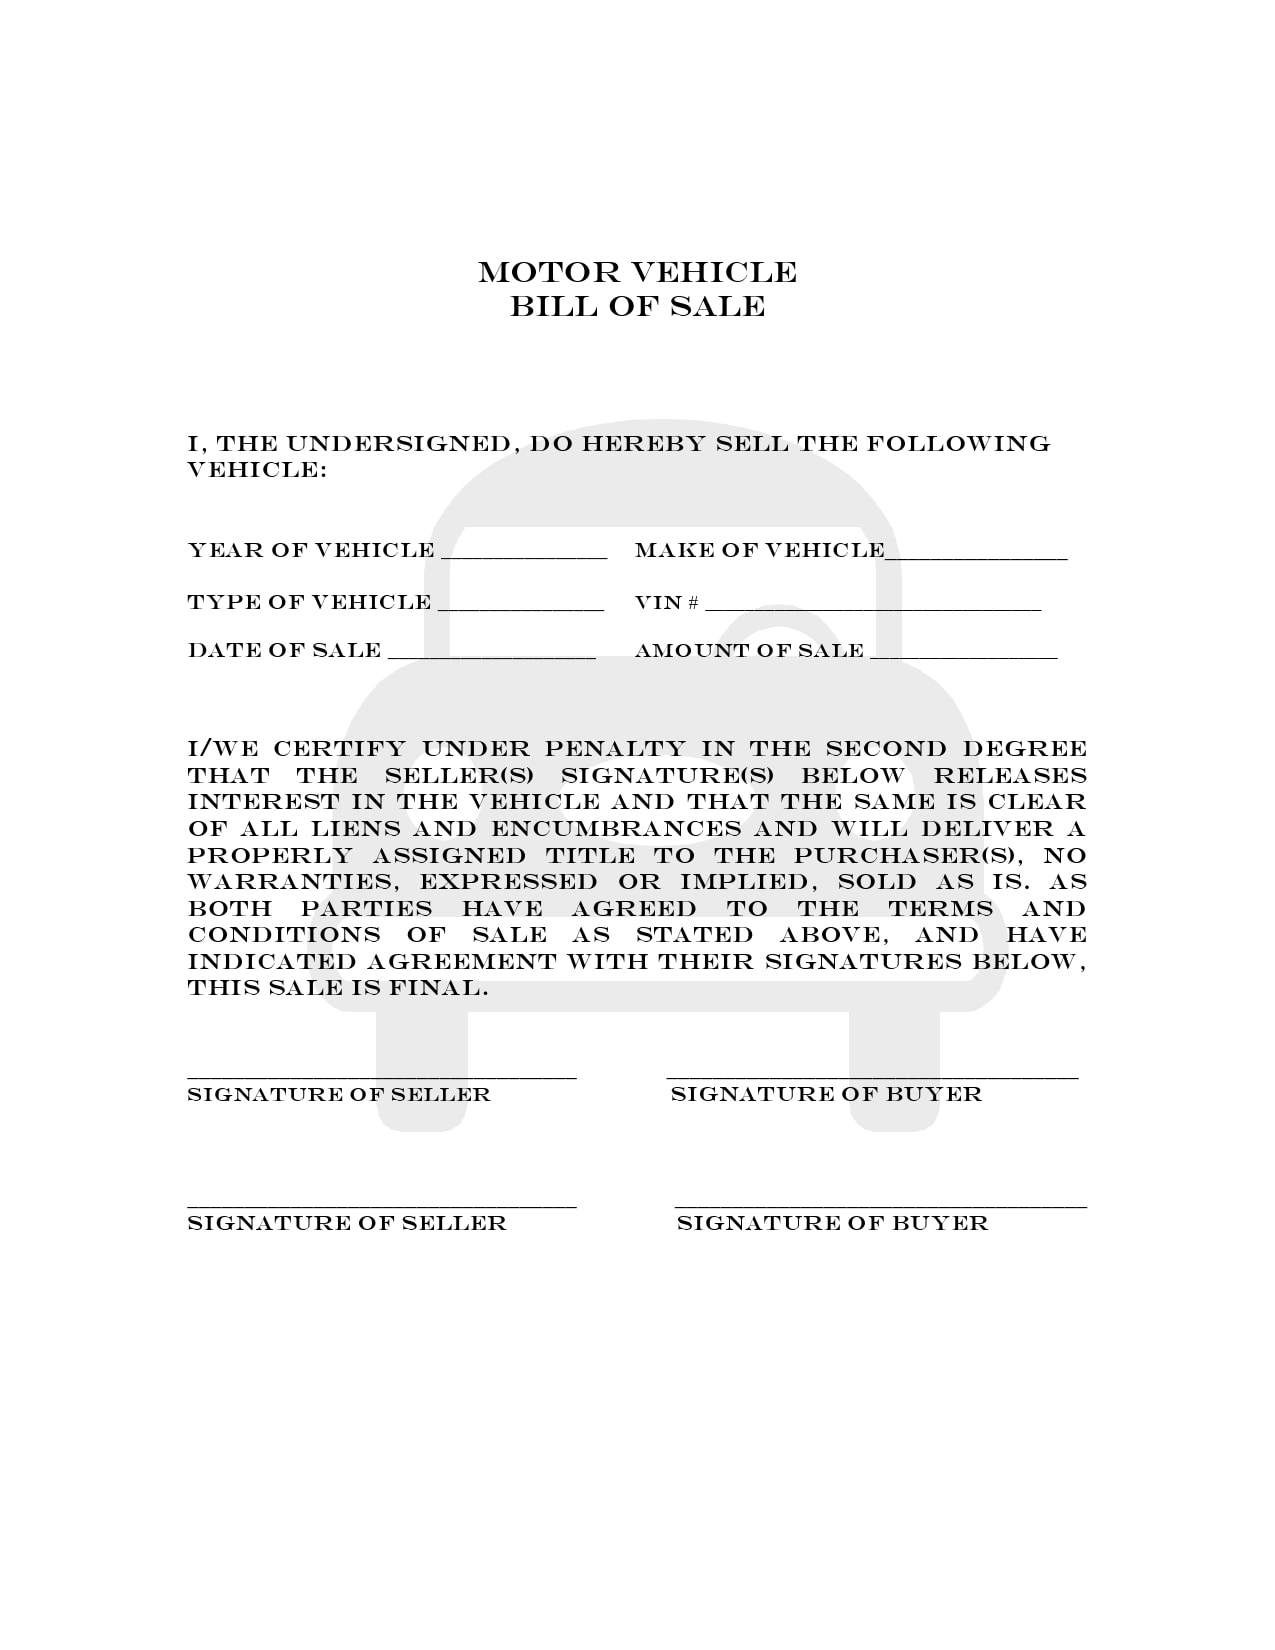 Motorcycle Bill of Sale Form 1